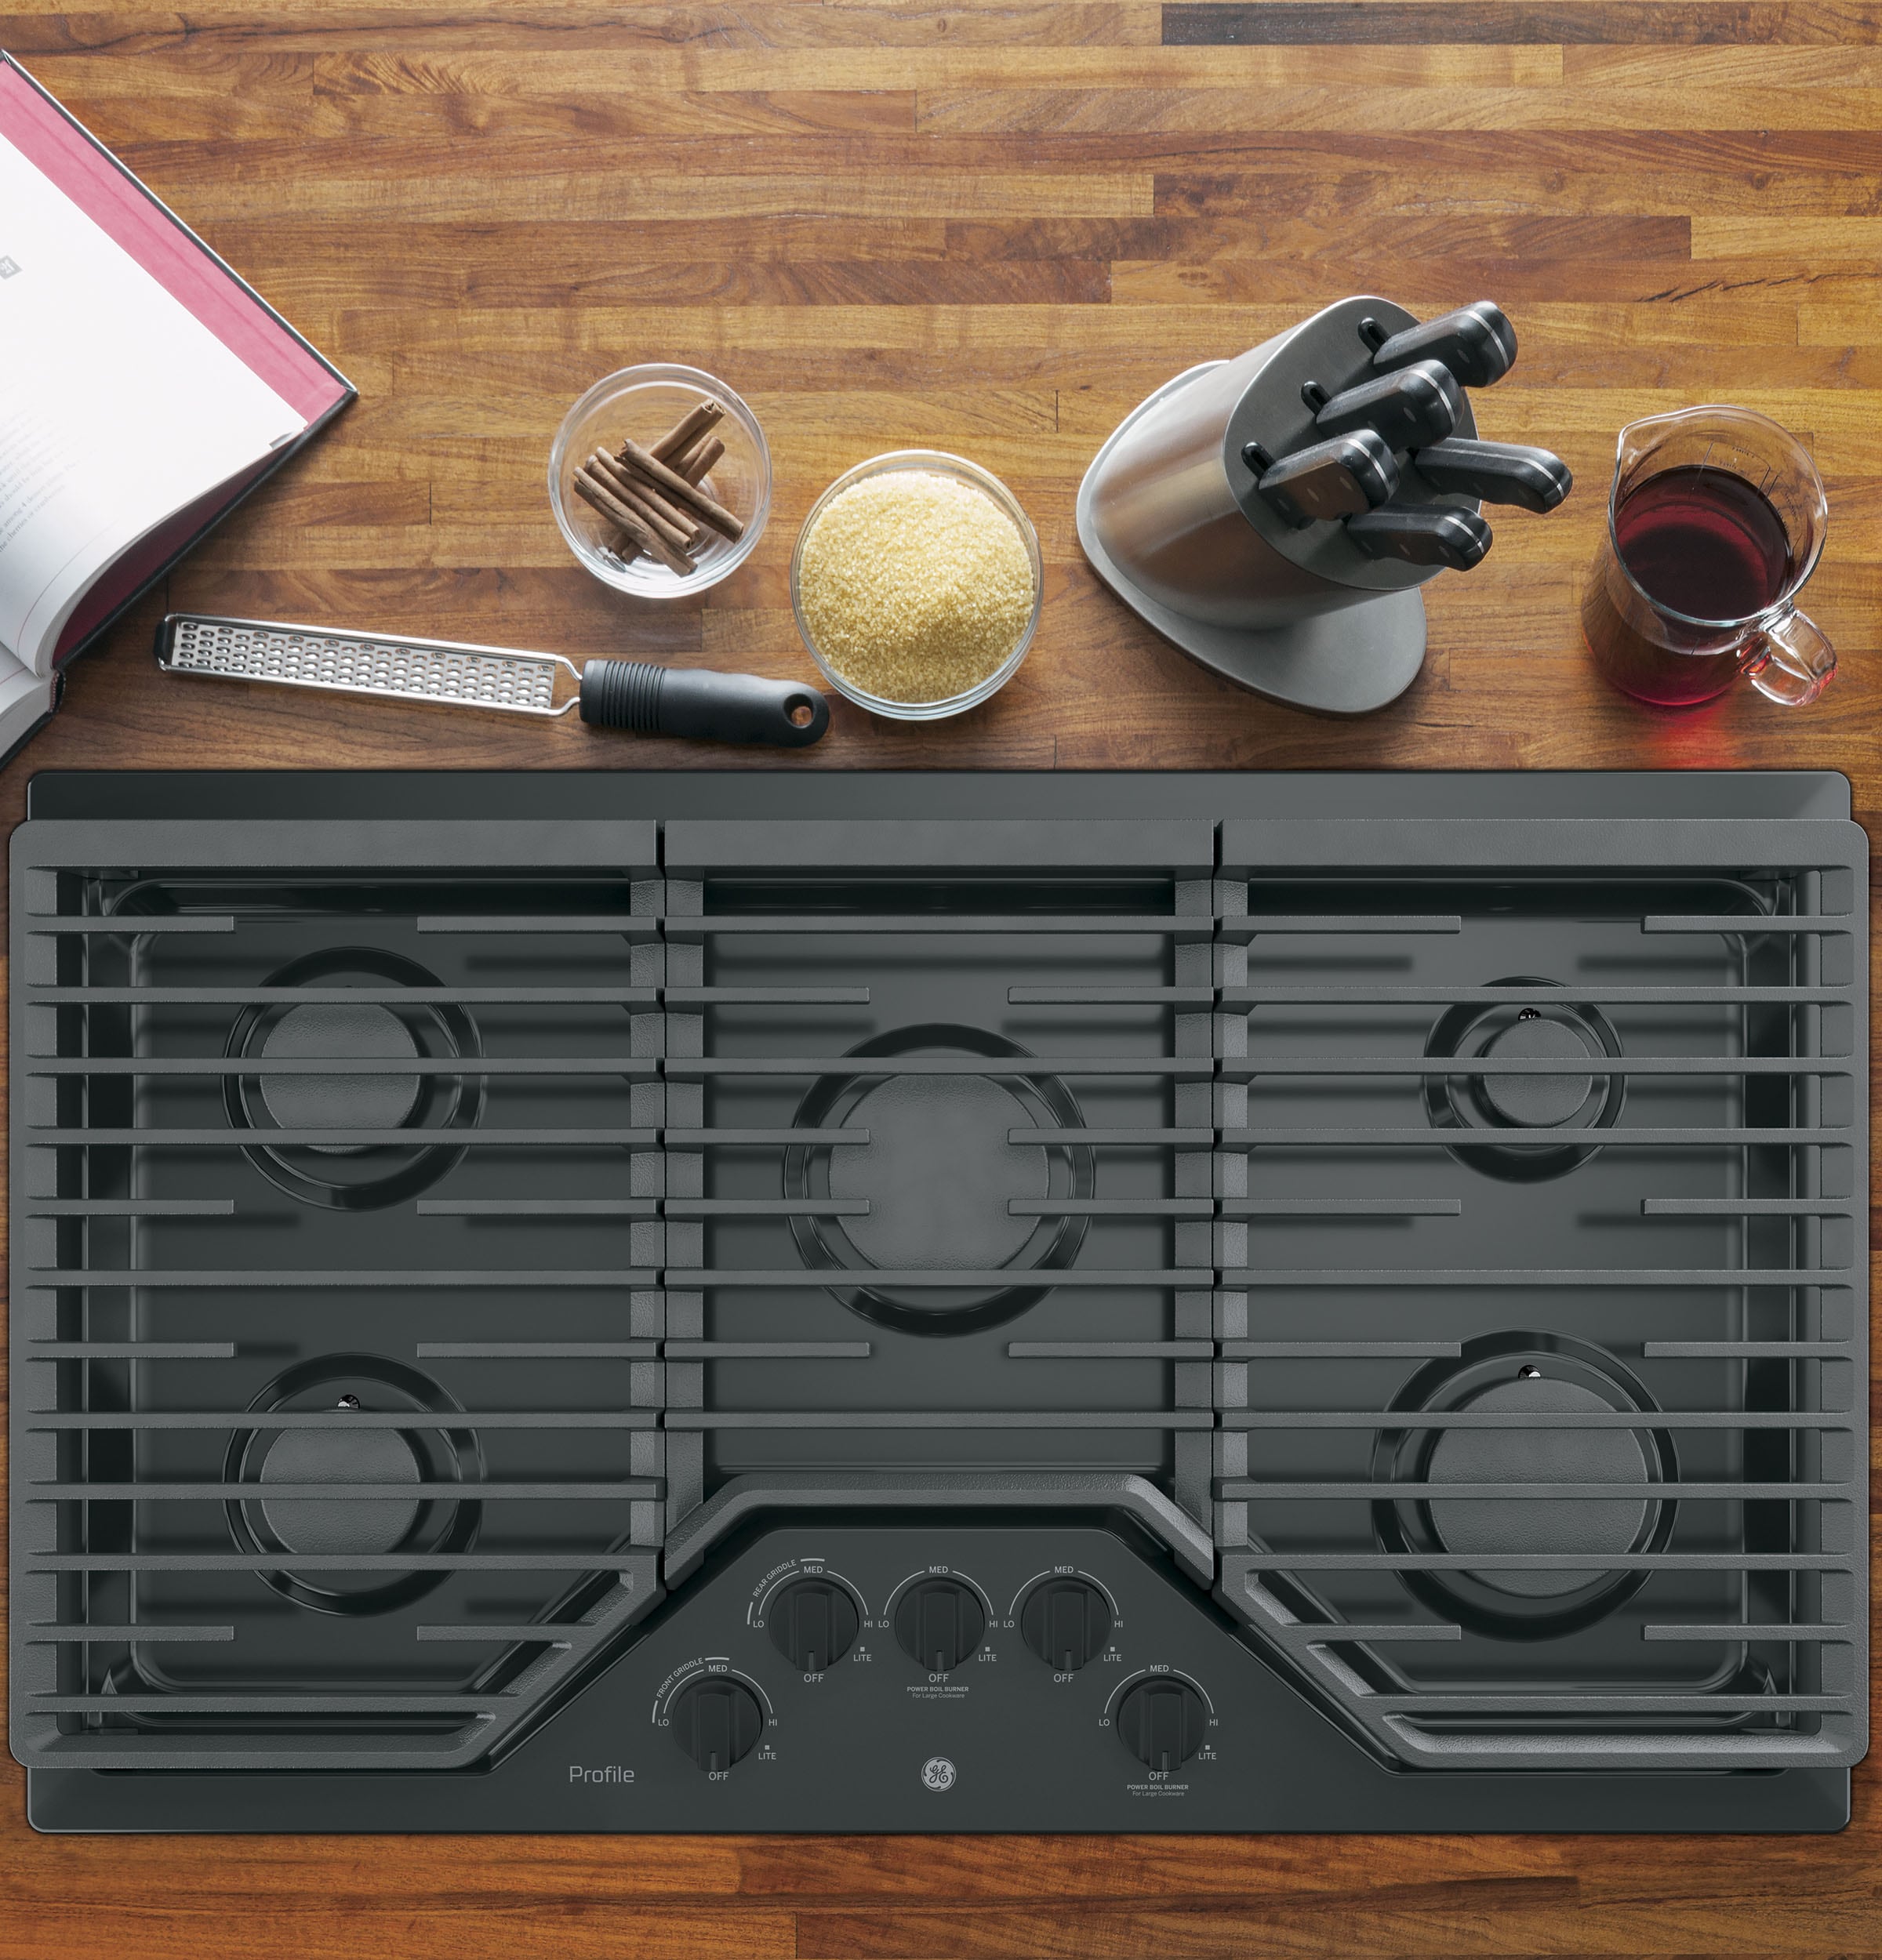 GE Profile PGP7036SLSS 36 Built-in GAS Cooktop - Stainless Steel